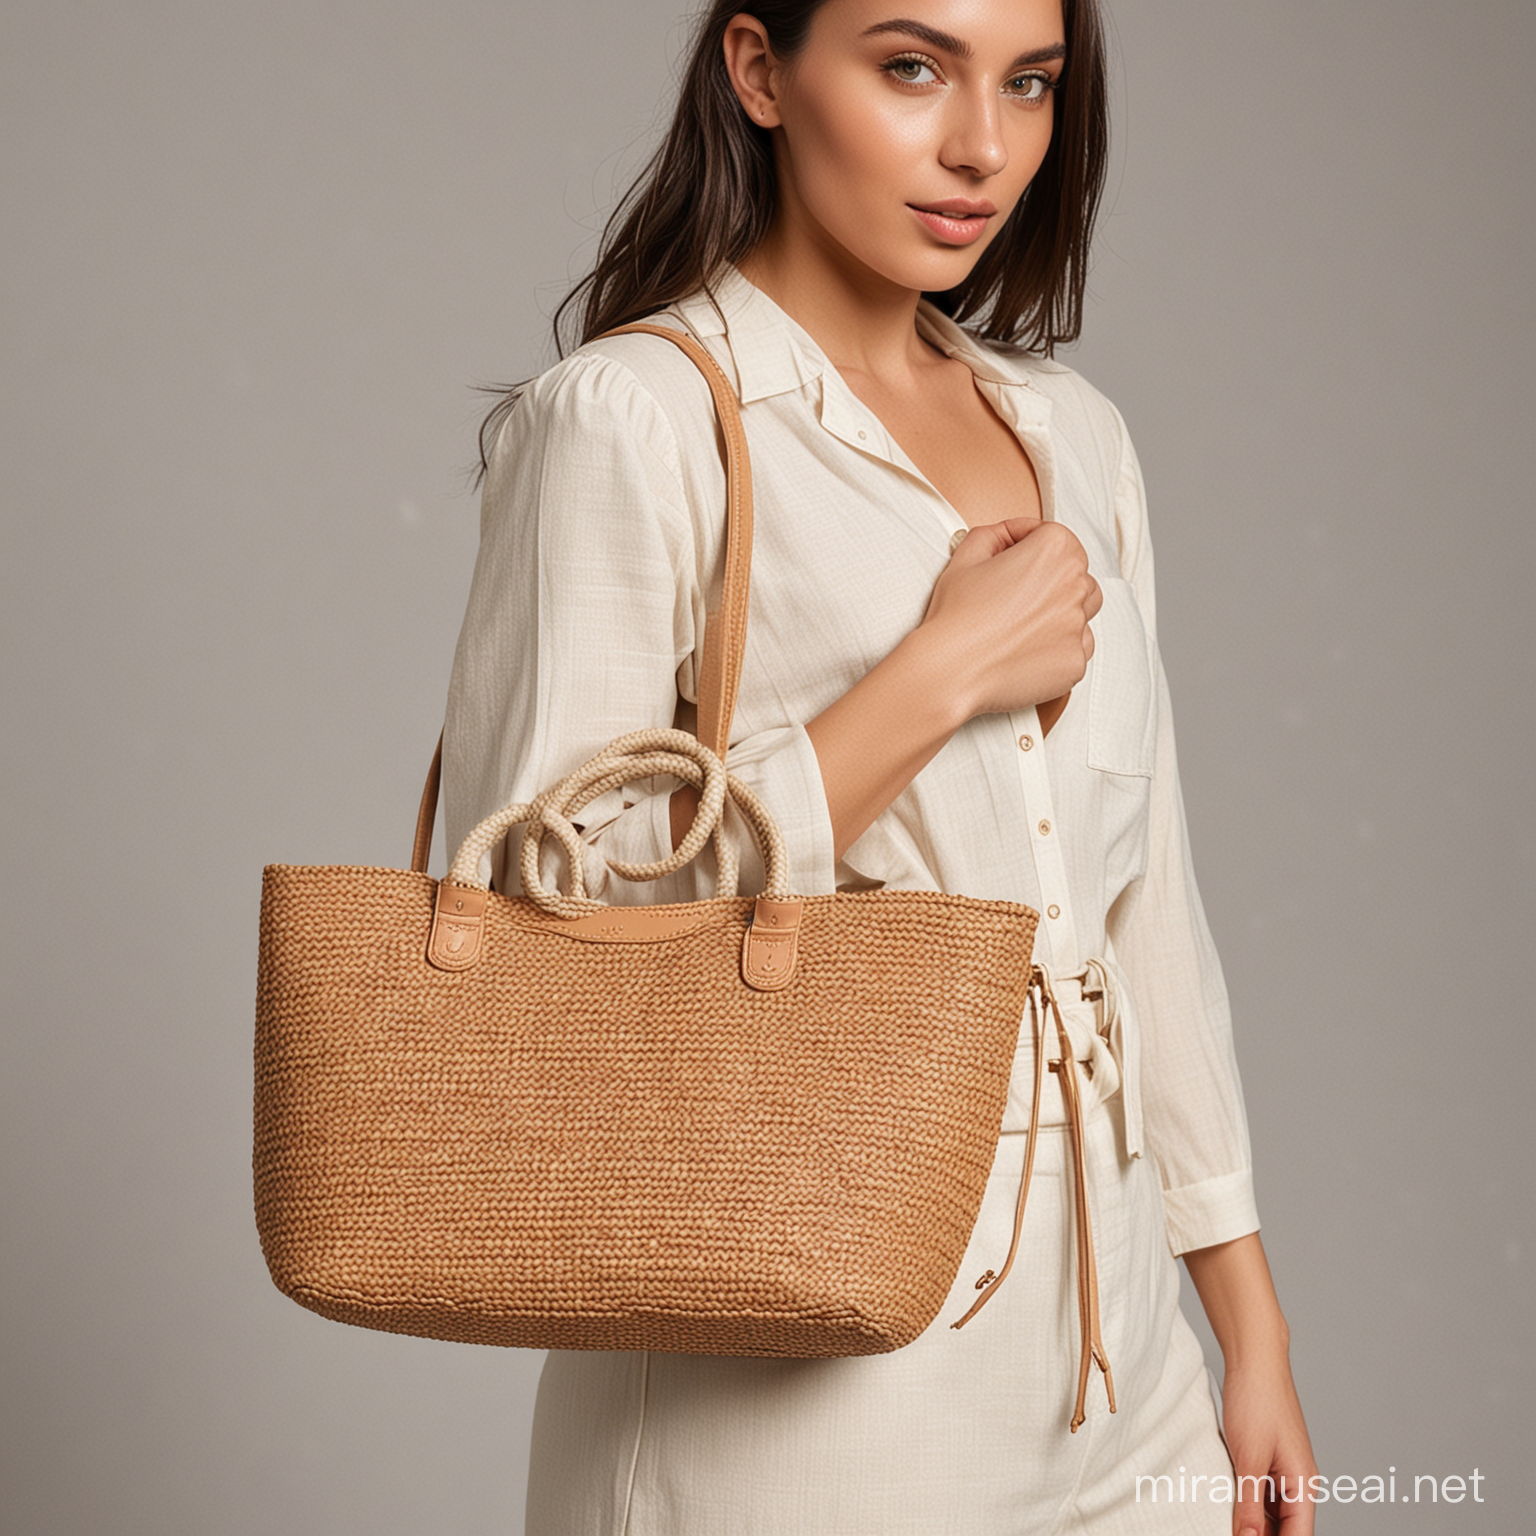 EcoFriendly Rafia Bags with Vegan Leather Featuring a Natural Beauty